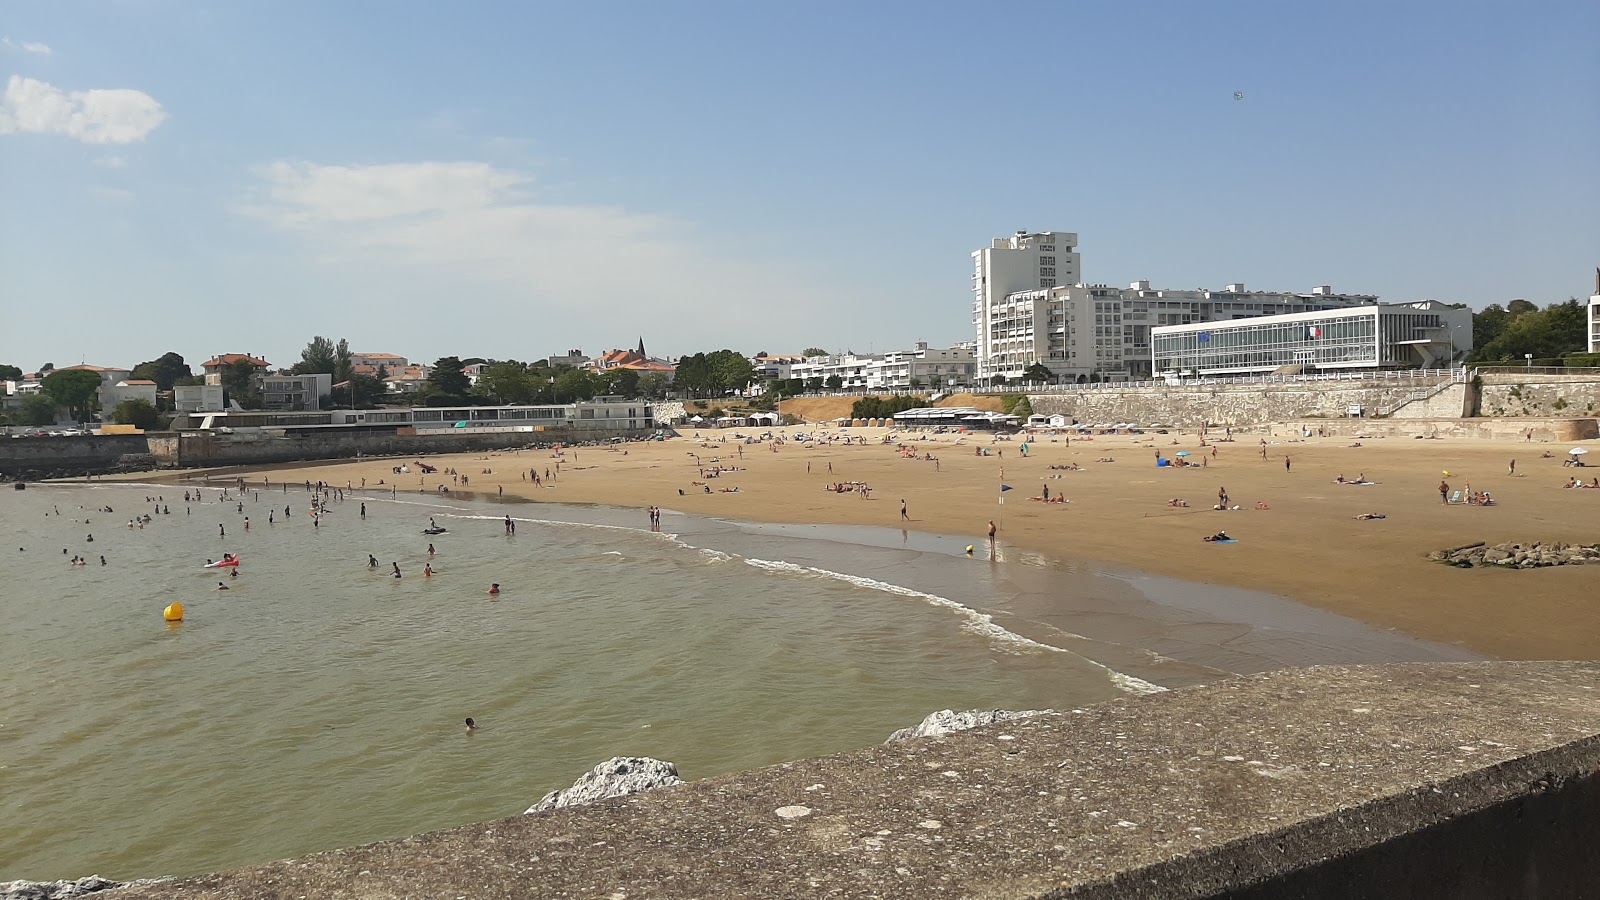 Photo of Plage de Royan with brown sand surface